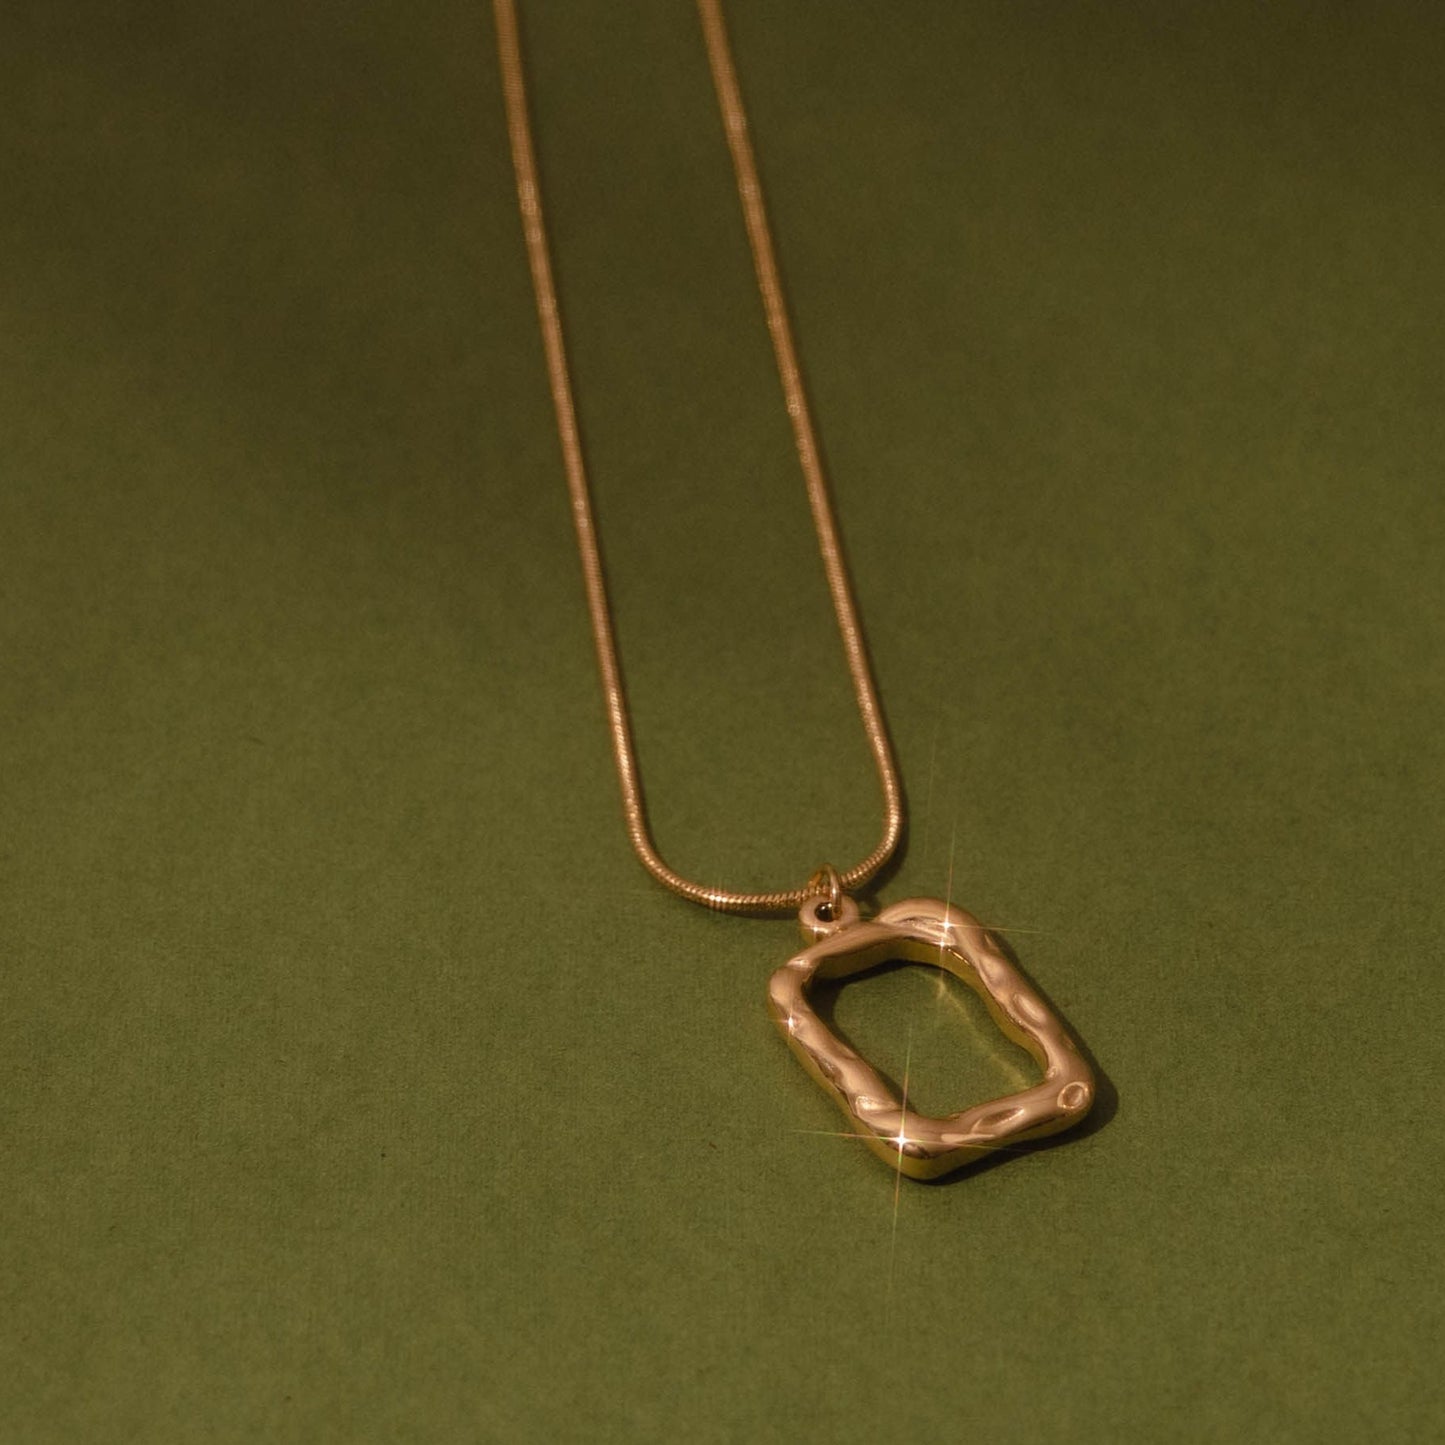 An image of our product Soleli Necklace